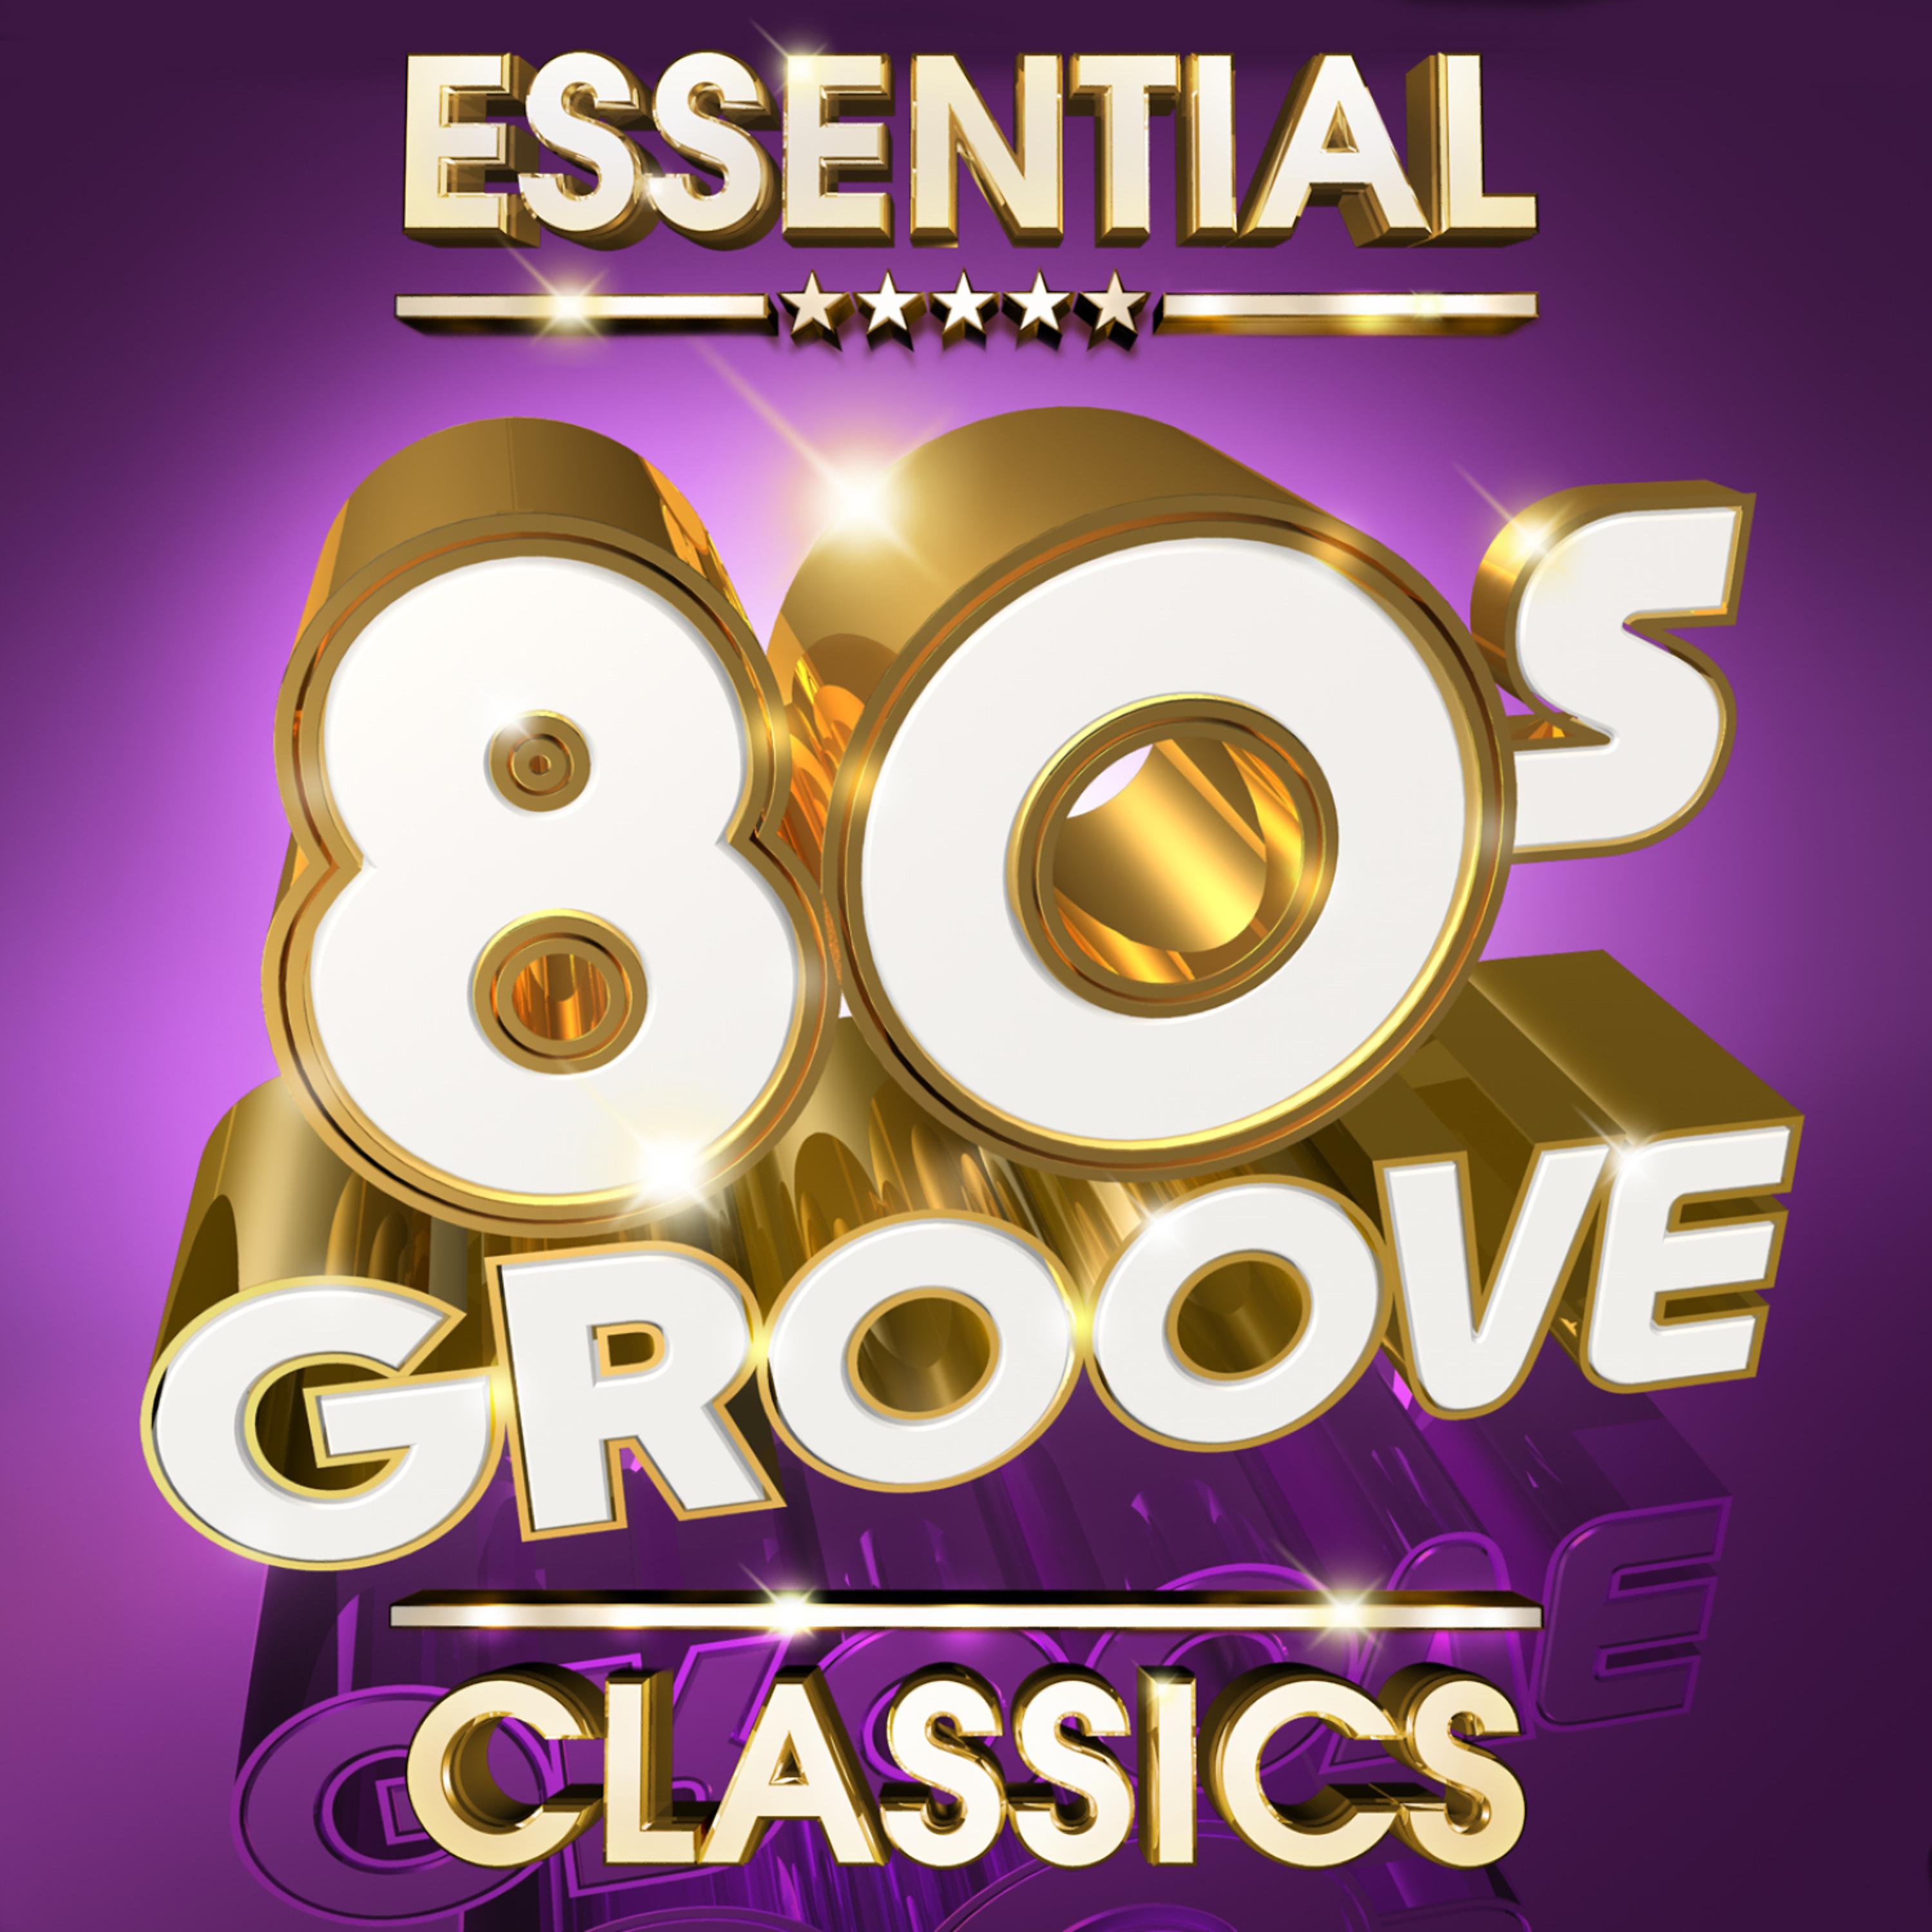 Постер альбома Essential 80s Groove Classics - The Top 30 best ever 80’s Grooves Mastercuts Hits of all time!